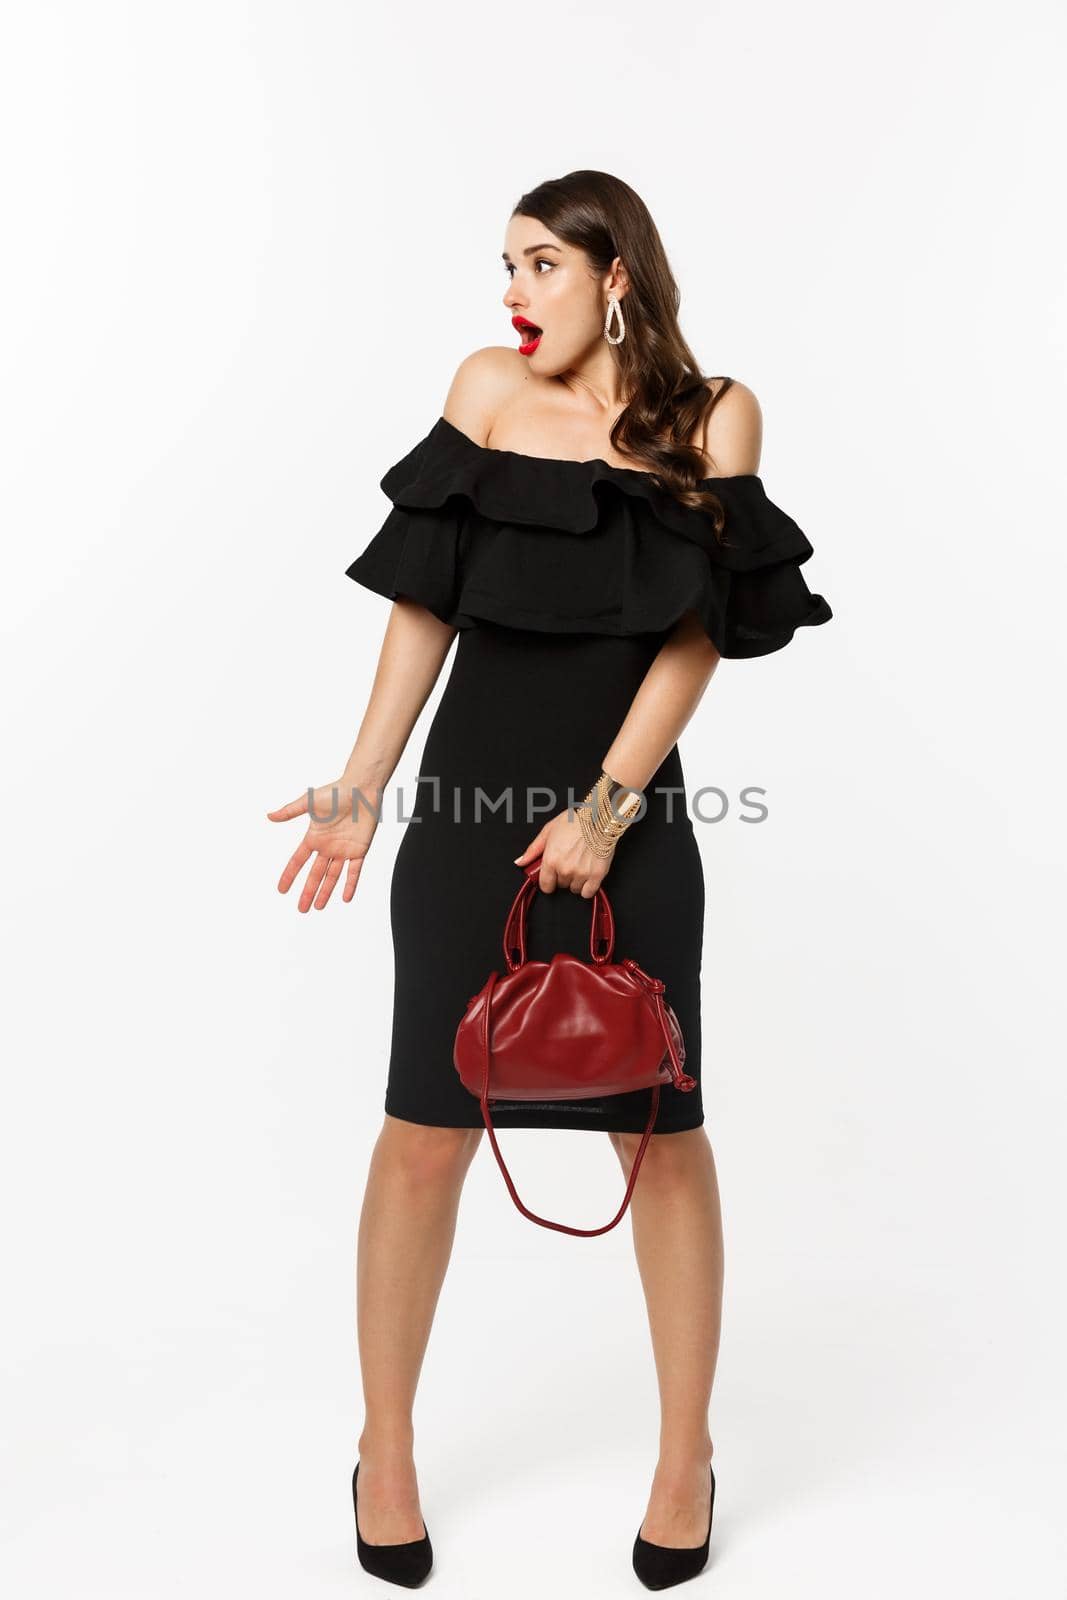 Beauty and fashion concept. Full length of surprised woman in elegant dress, heels looking left confused, holding purse, cant understand what happening, white background.